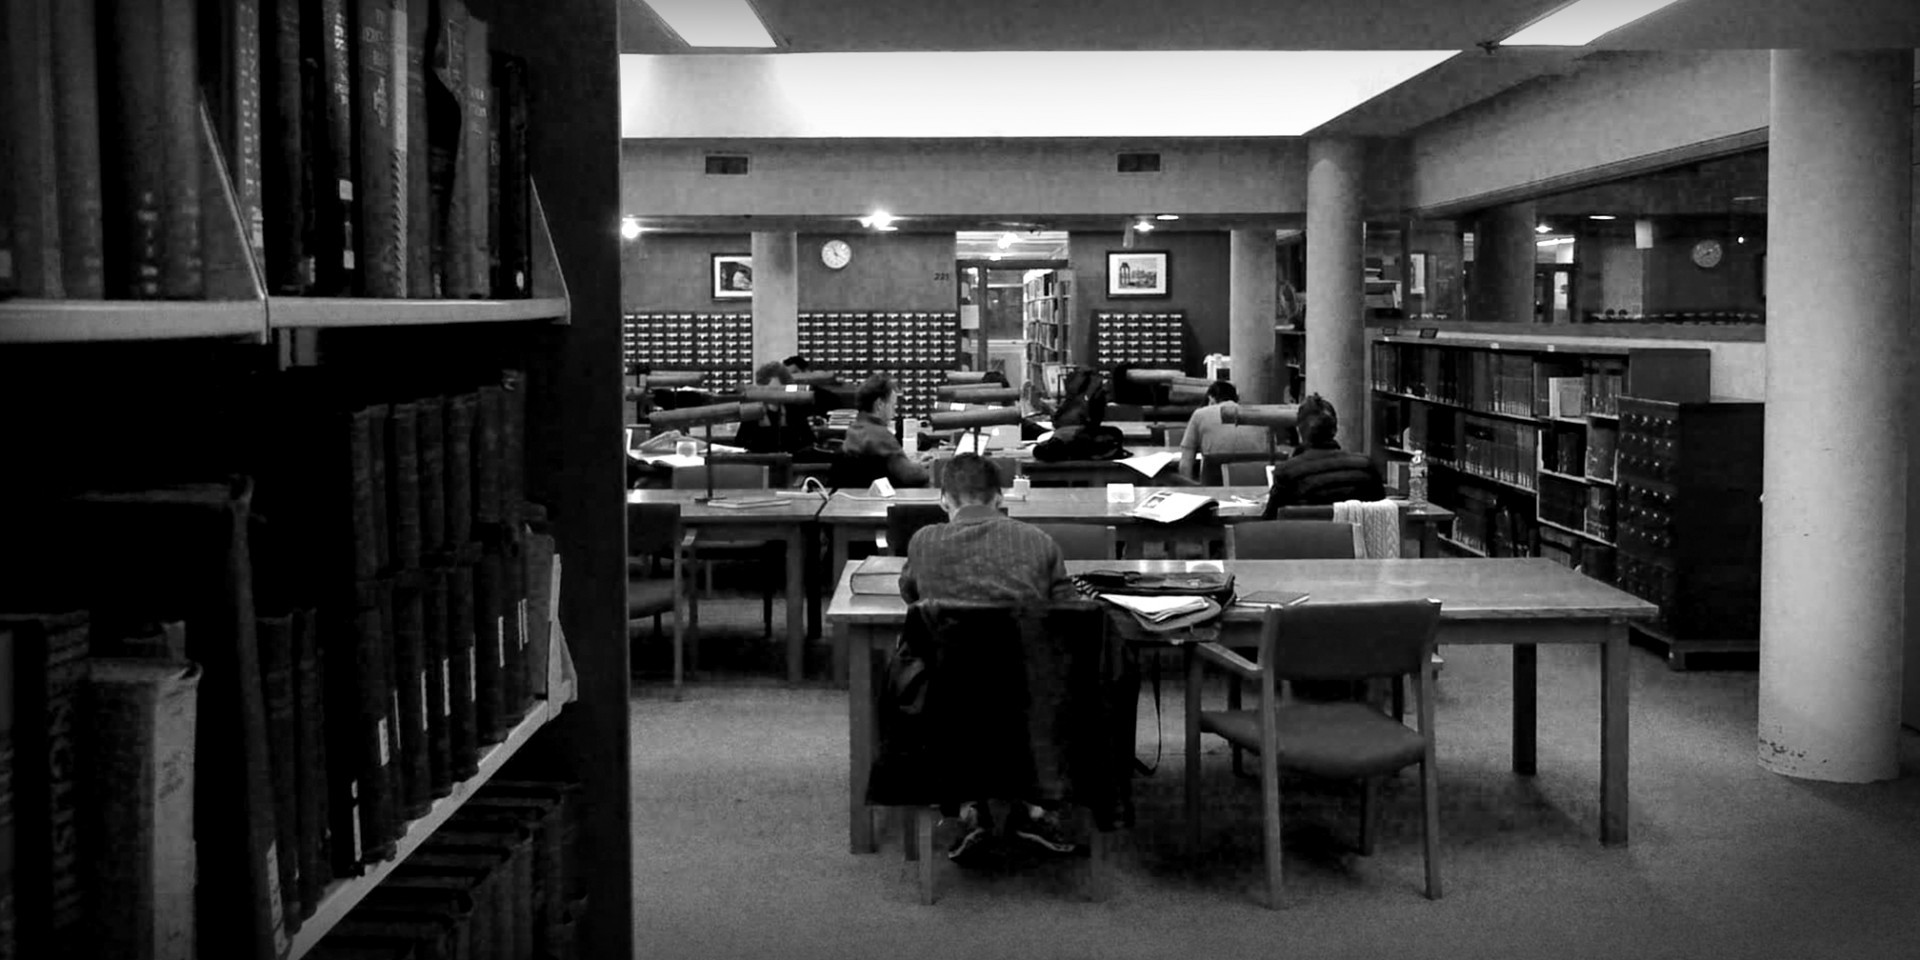 students studying in a library.